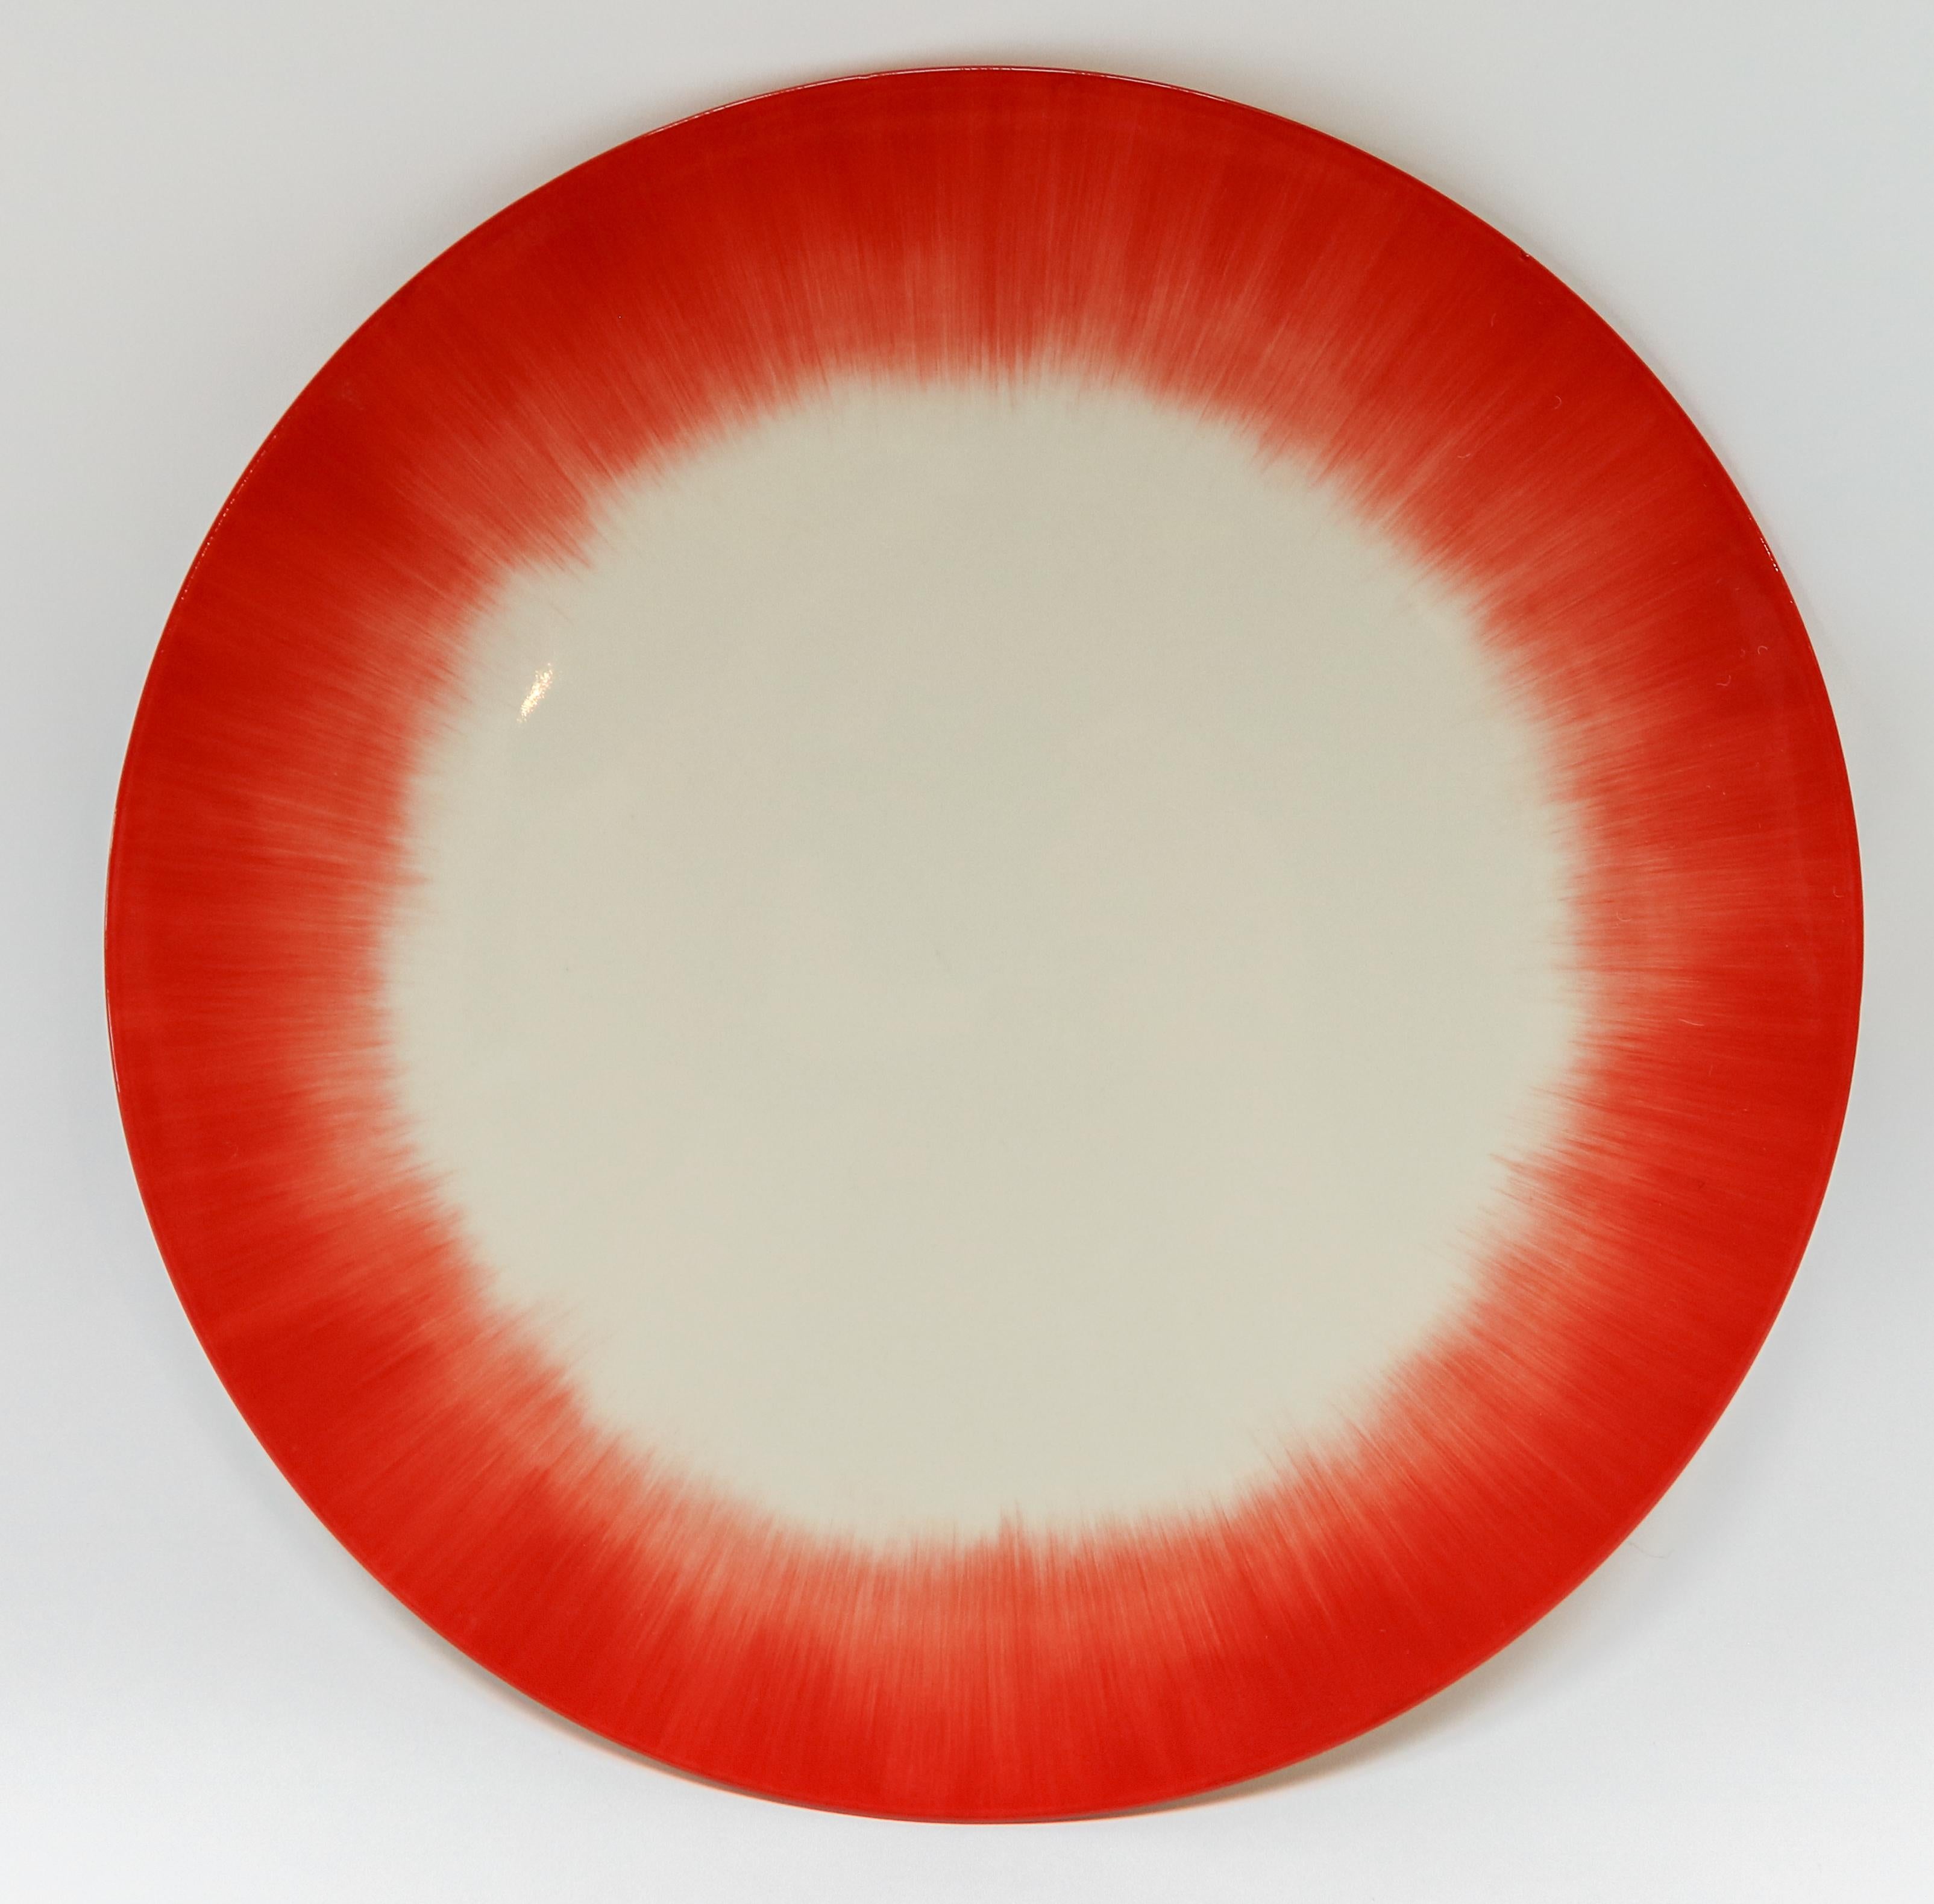 Ann Demeulemeester for Serax Dé dinner plate / charger in off white / red. Hand painted with a starburst pattern. Measures: 28cm diameter x 1.8 cm high. Must be purchased in quantities of two.